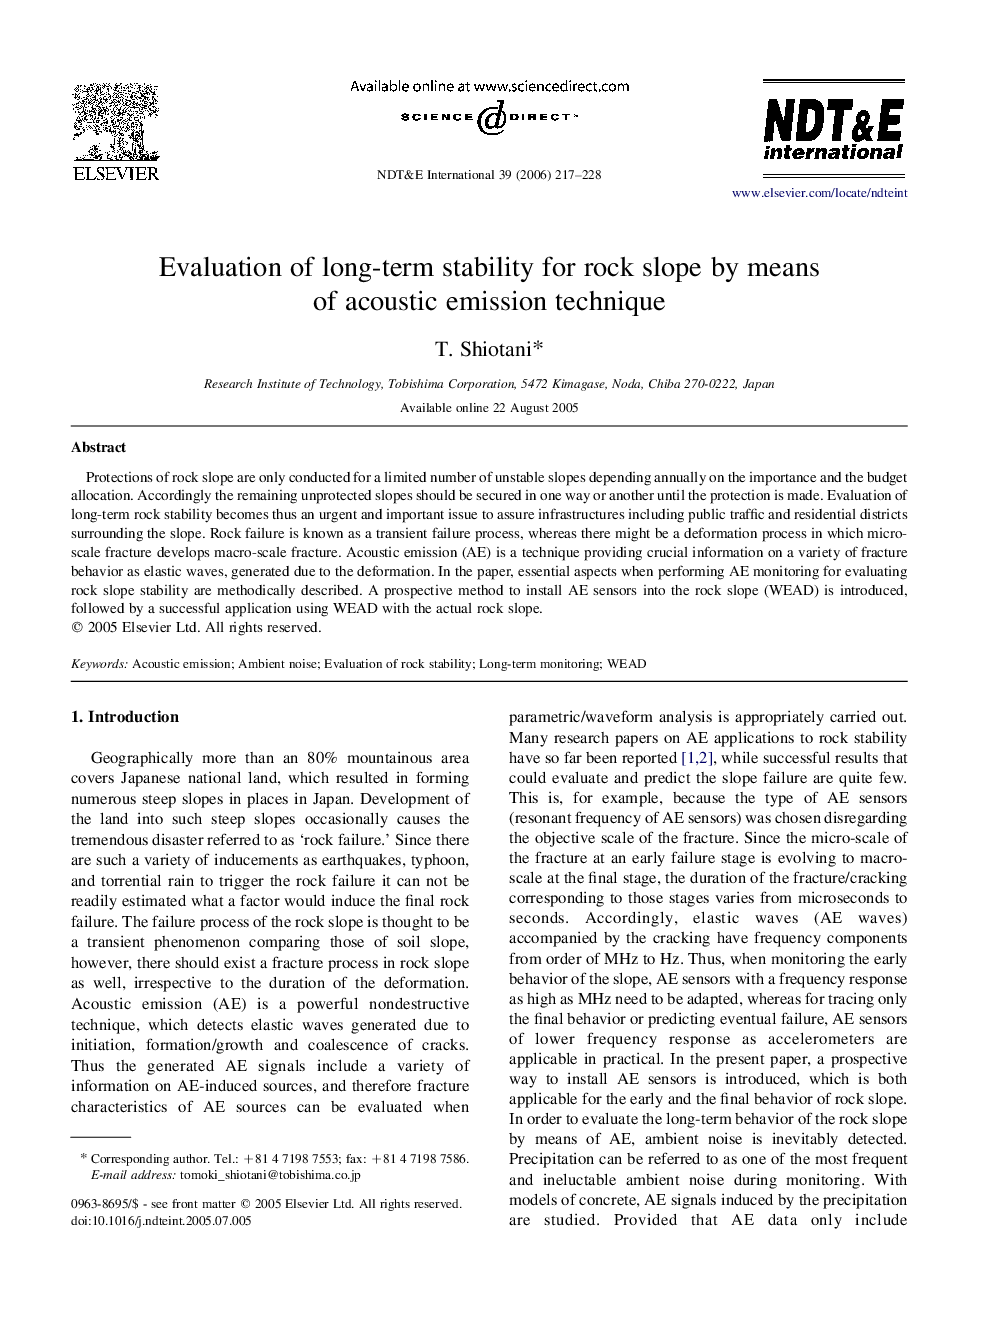 Evaluation of long-term stability for rock slope by means of acoustic emission technique